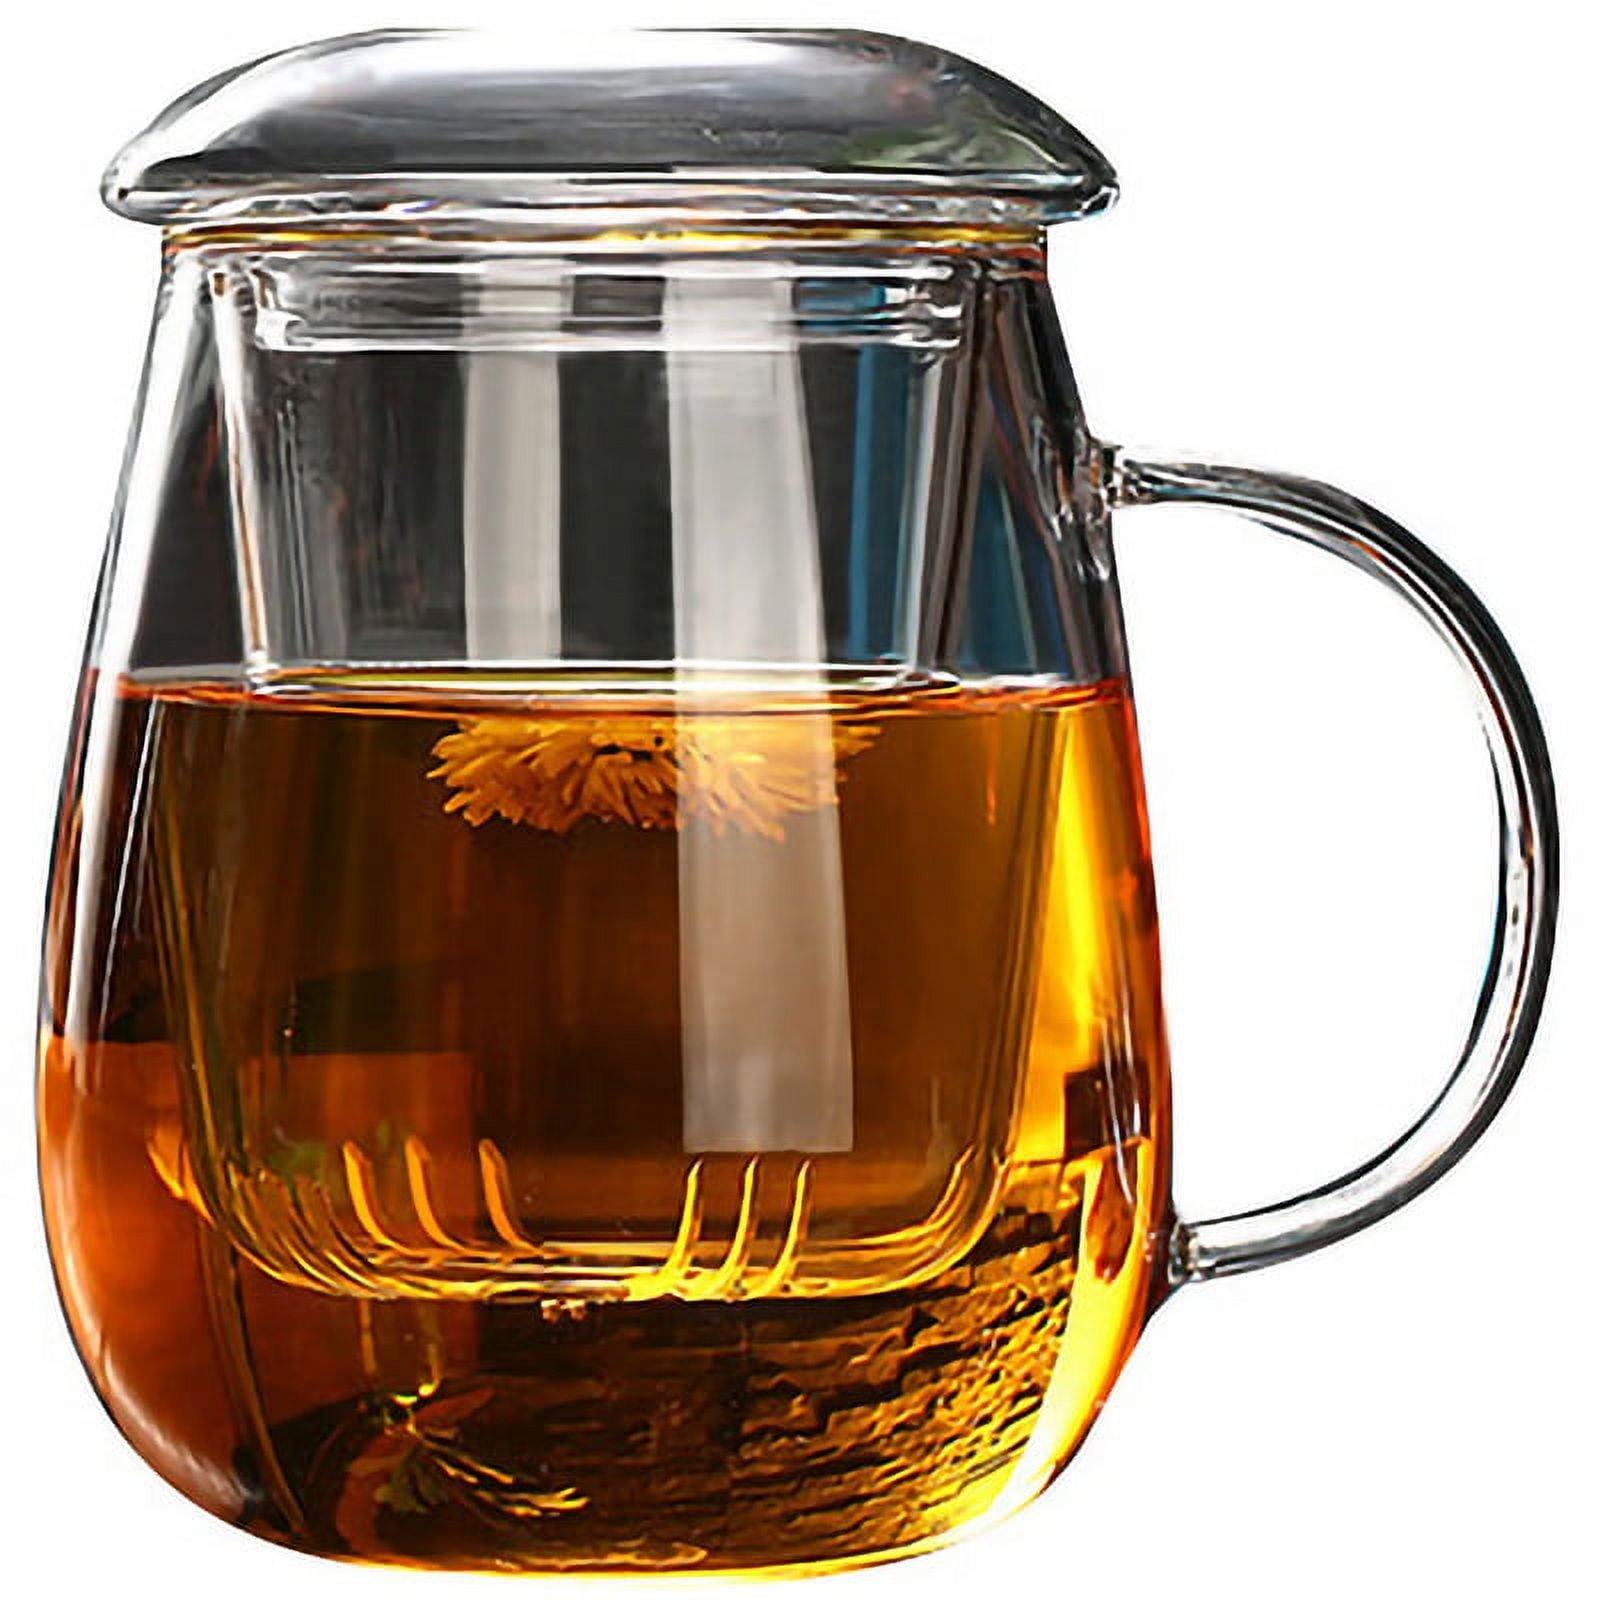 Coffee Tea Mug With Infuser Filter And Lid Transparent Water Clear Glass  Cup Set